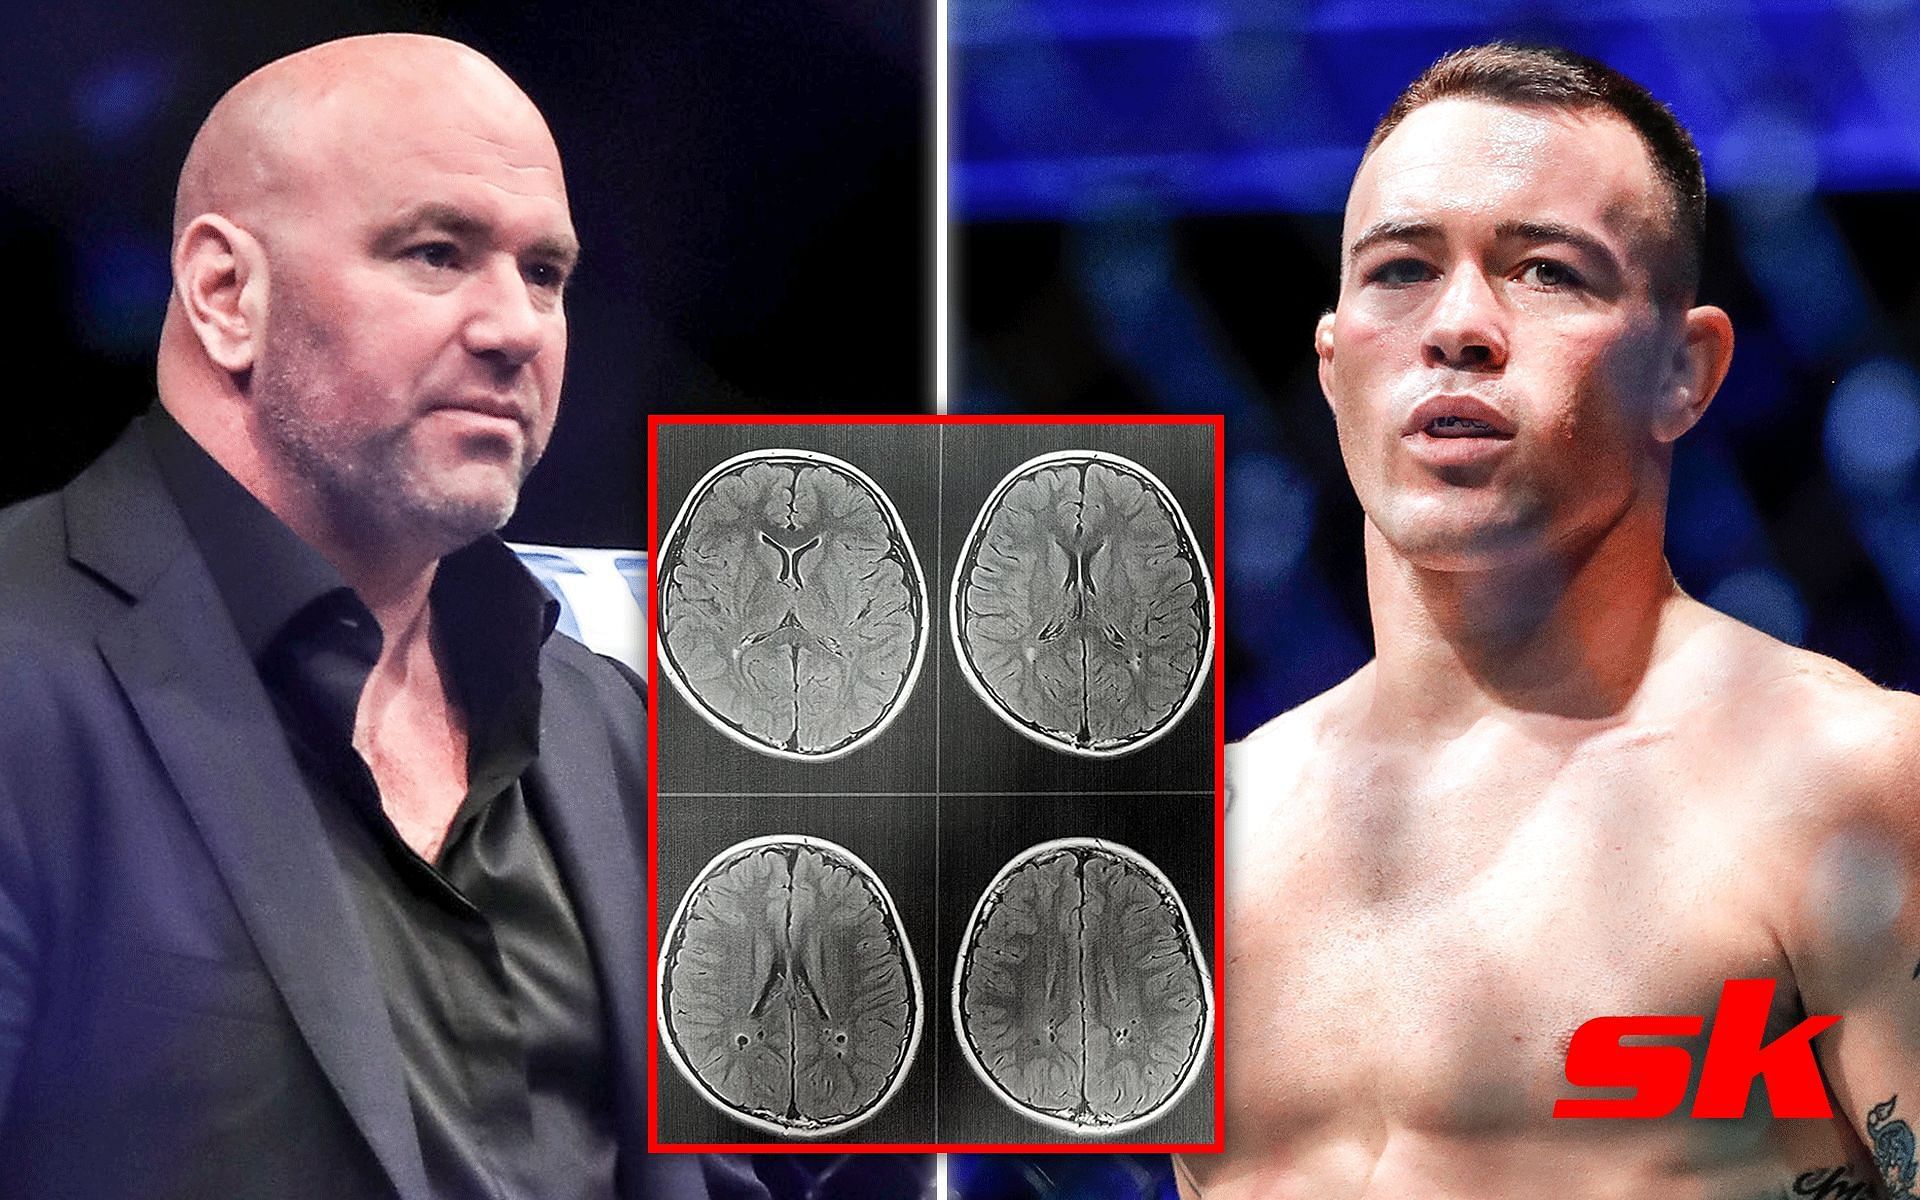 Could the UFC get sued if Colby Covington fights with brain injury? [Image courtesy: @girlmama1125 on Twitter, Getty]